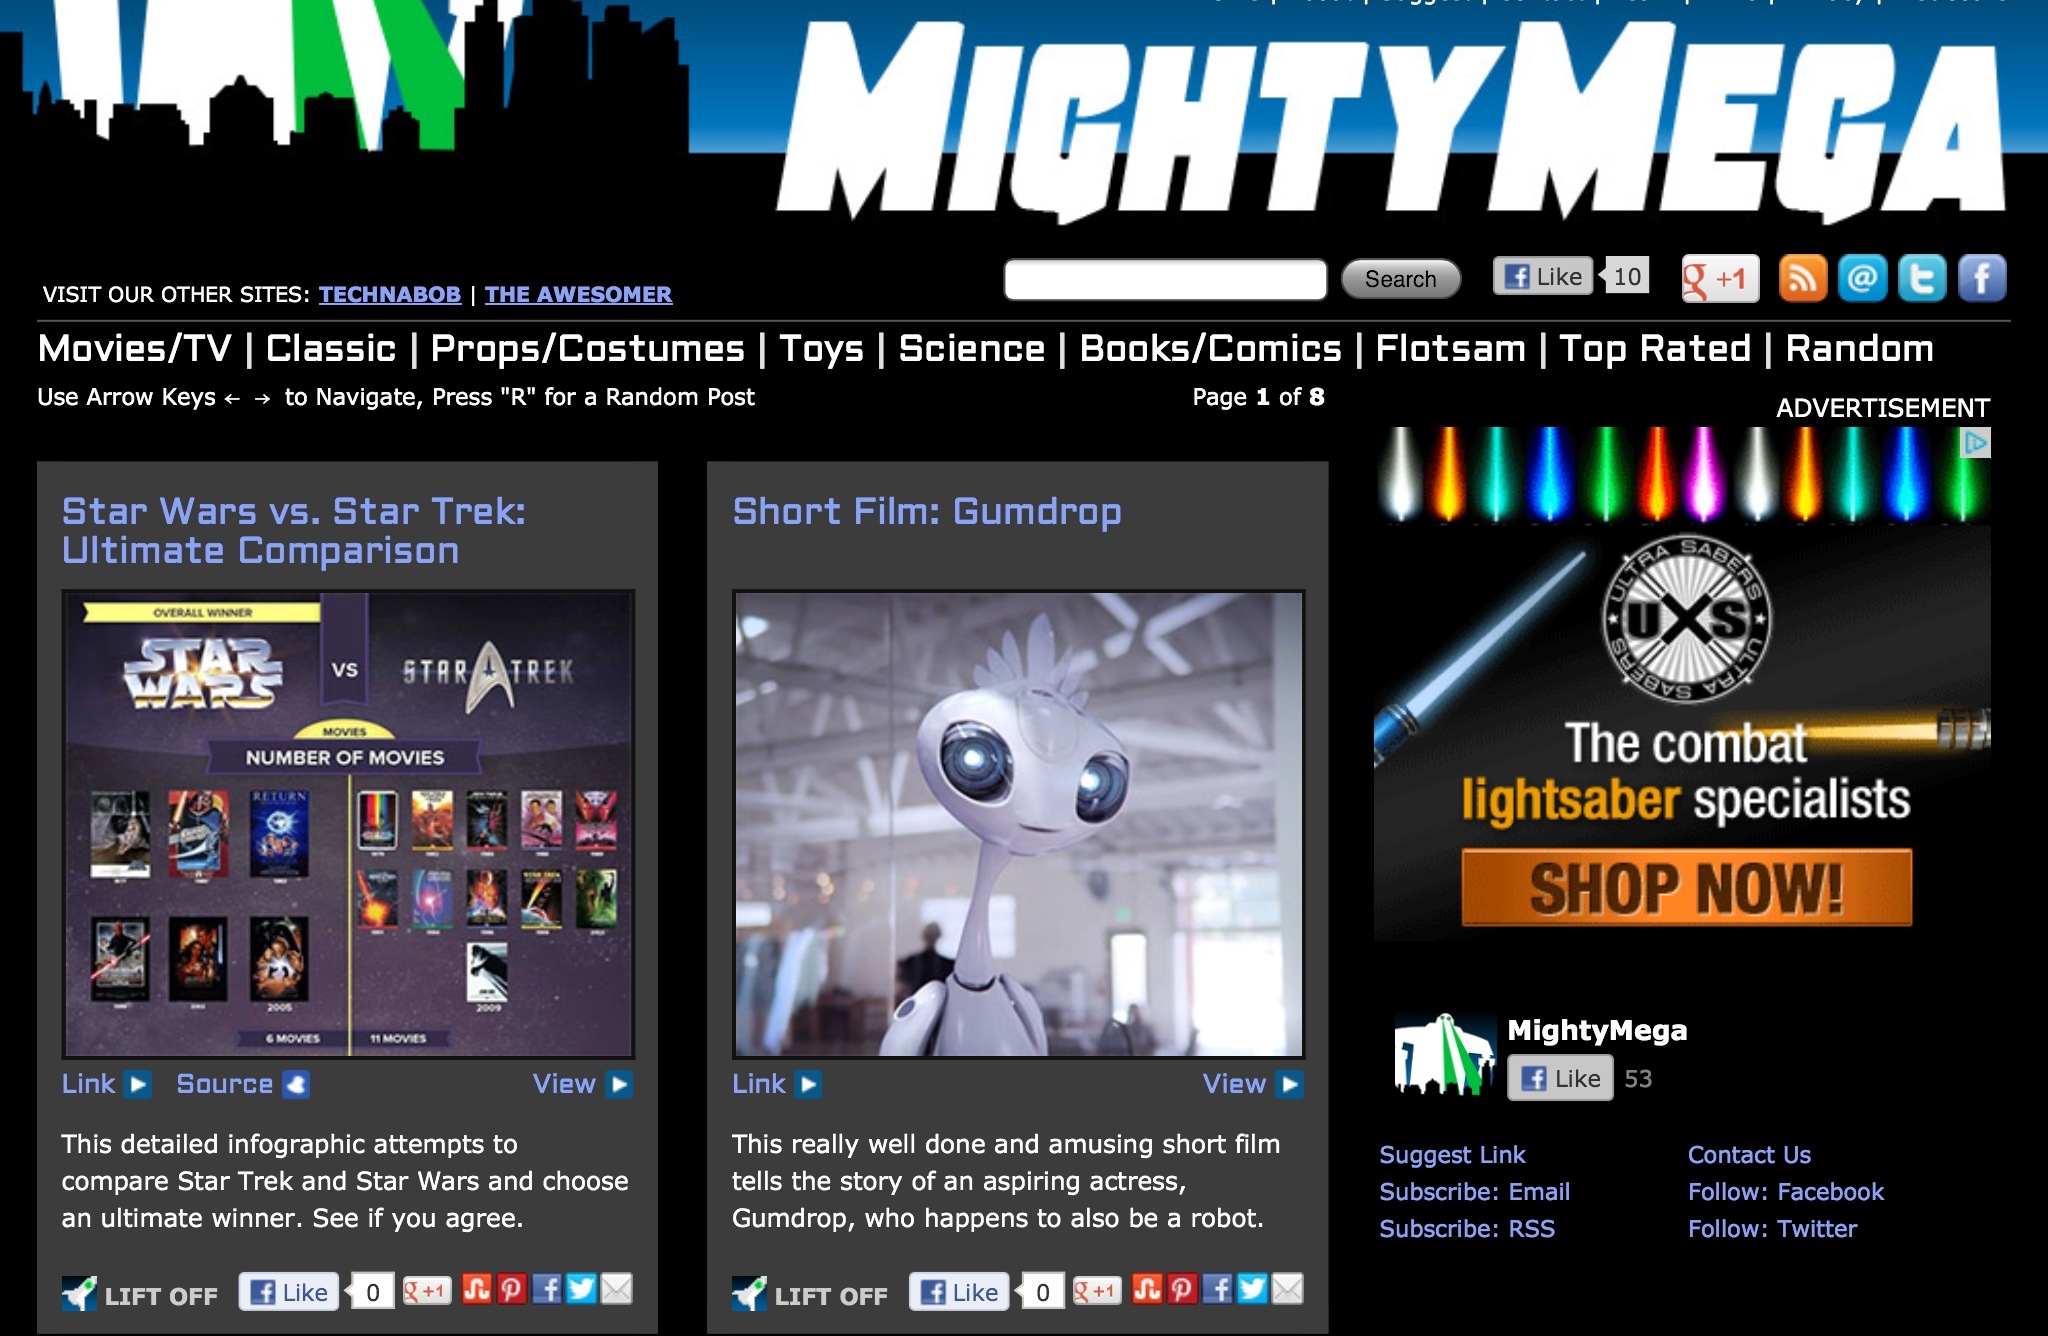 MightyMega Launches to Share All the Best in Sci Fi and Geekery